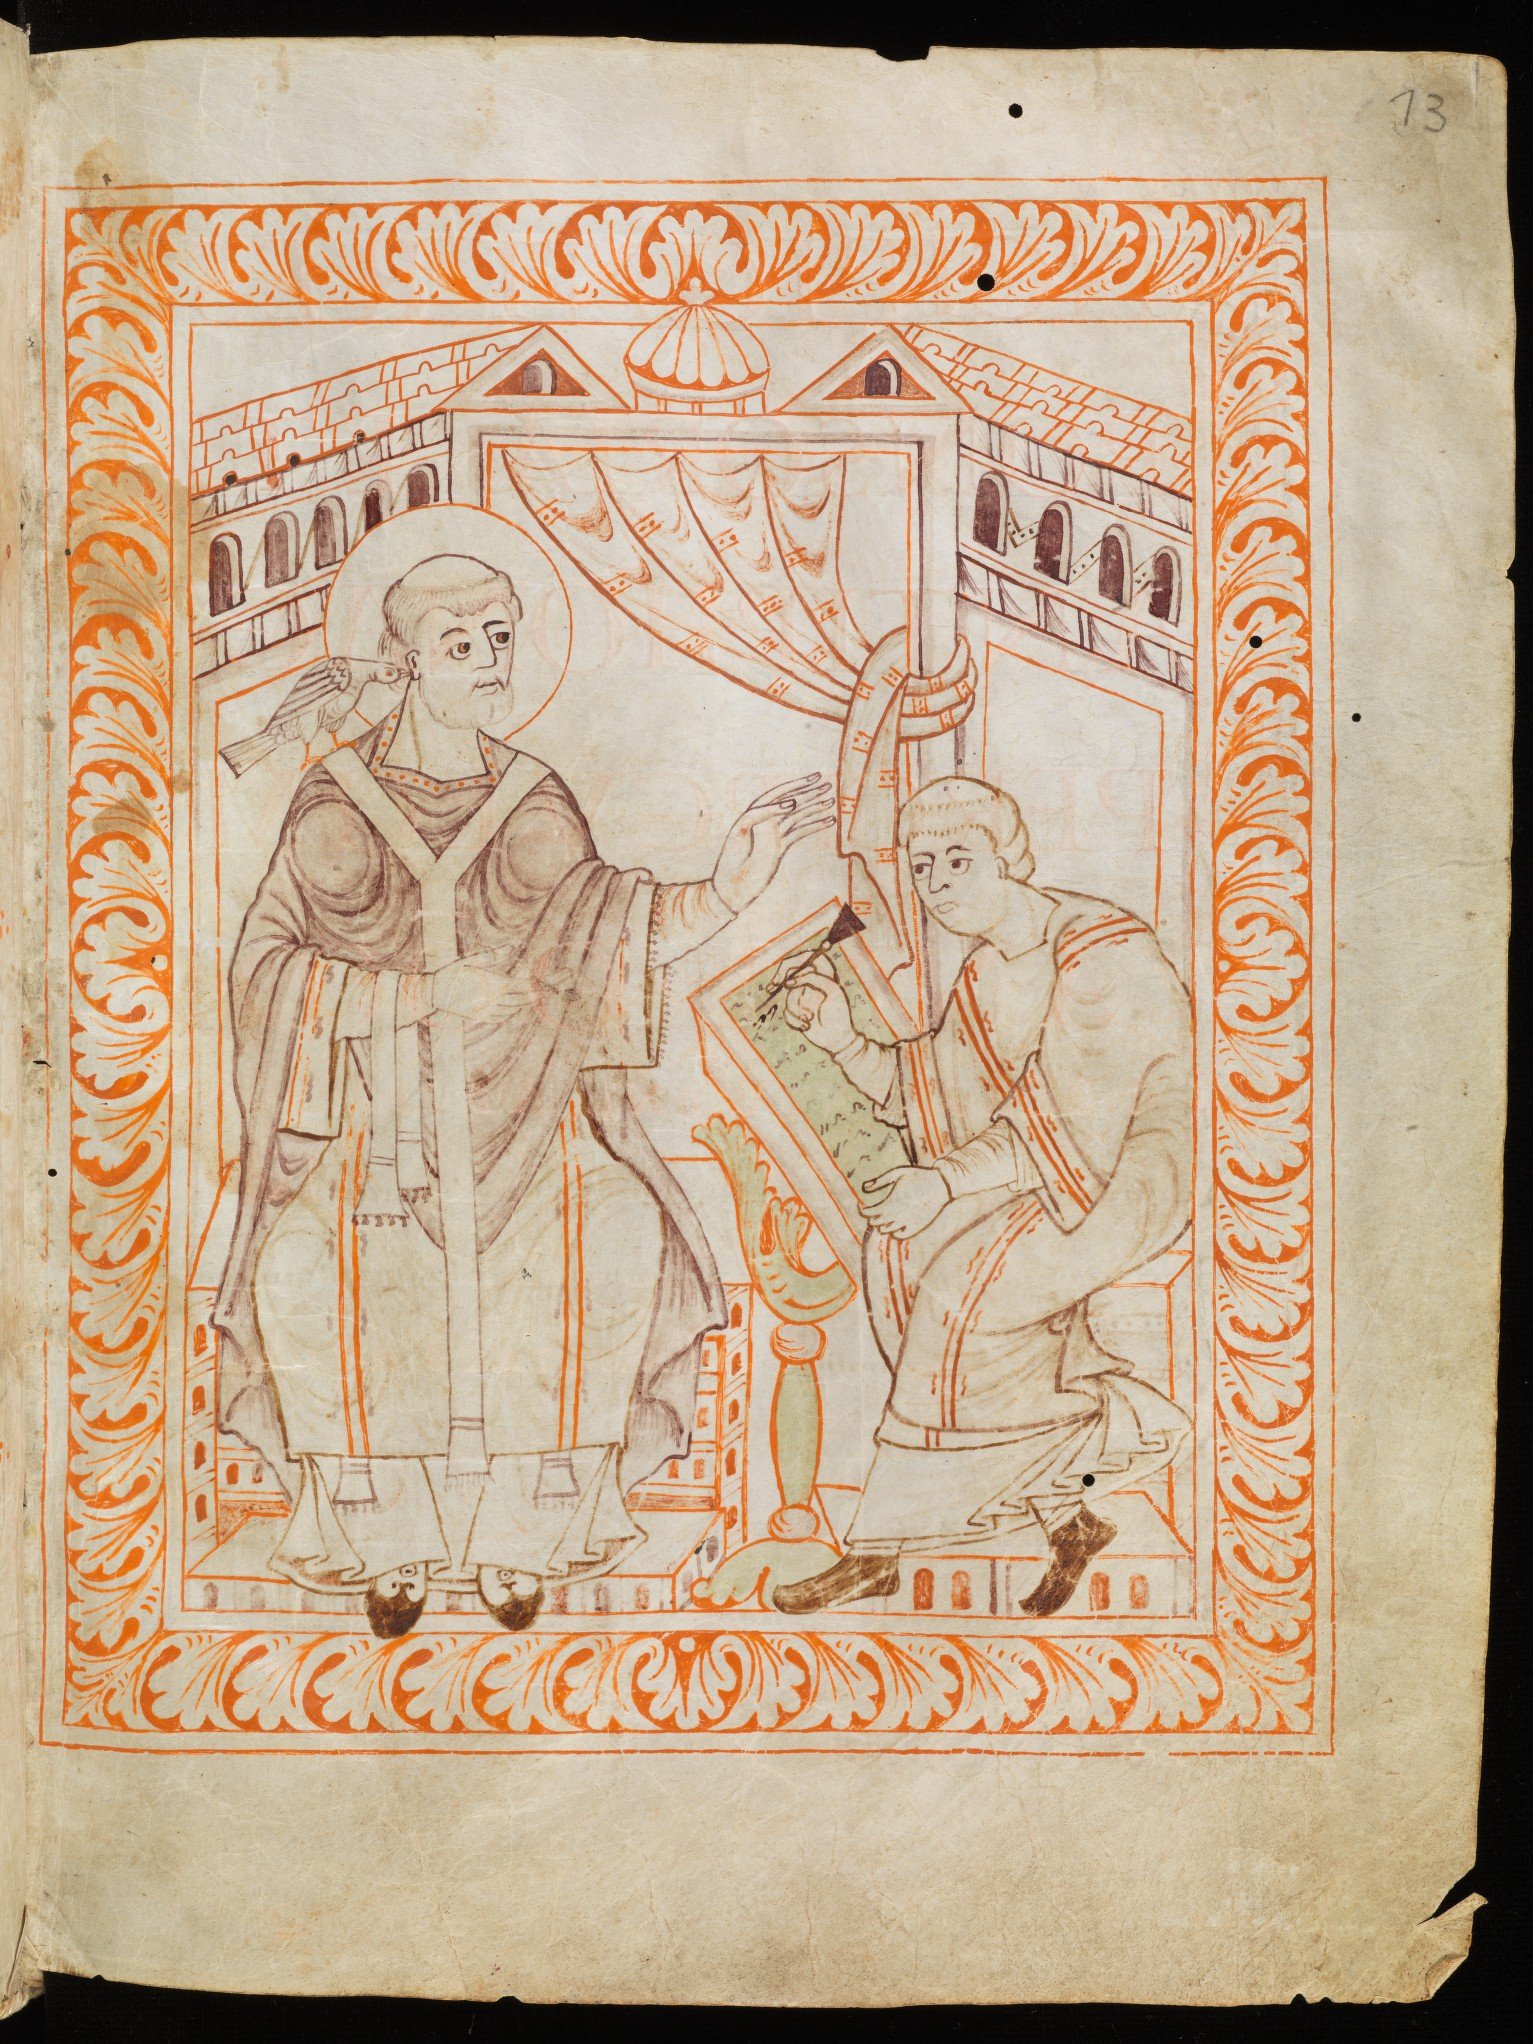 An illustration depicting Pope Gregory dictating a chant to a scribe